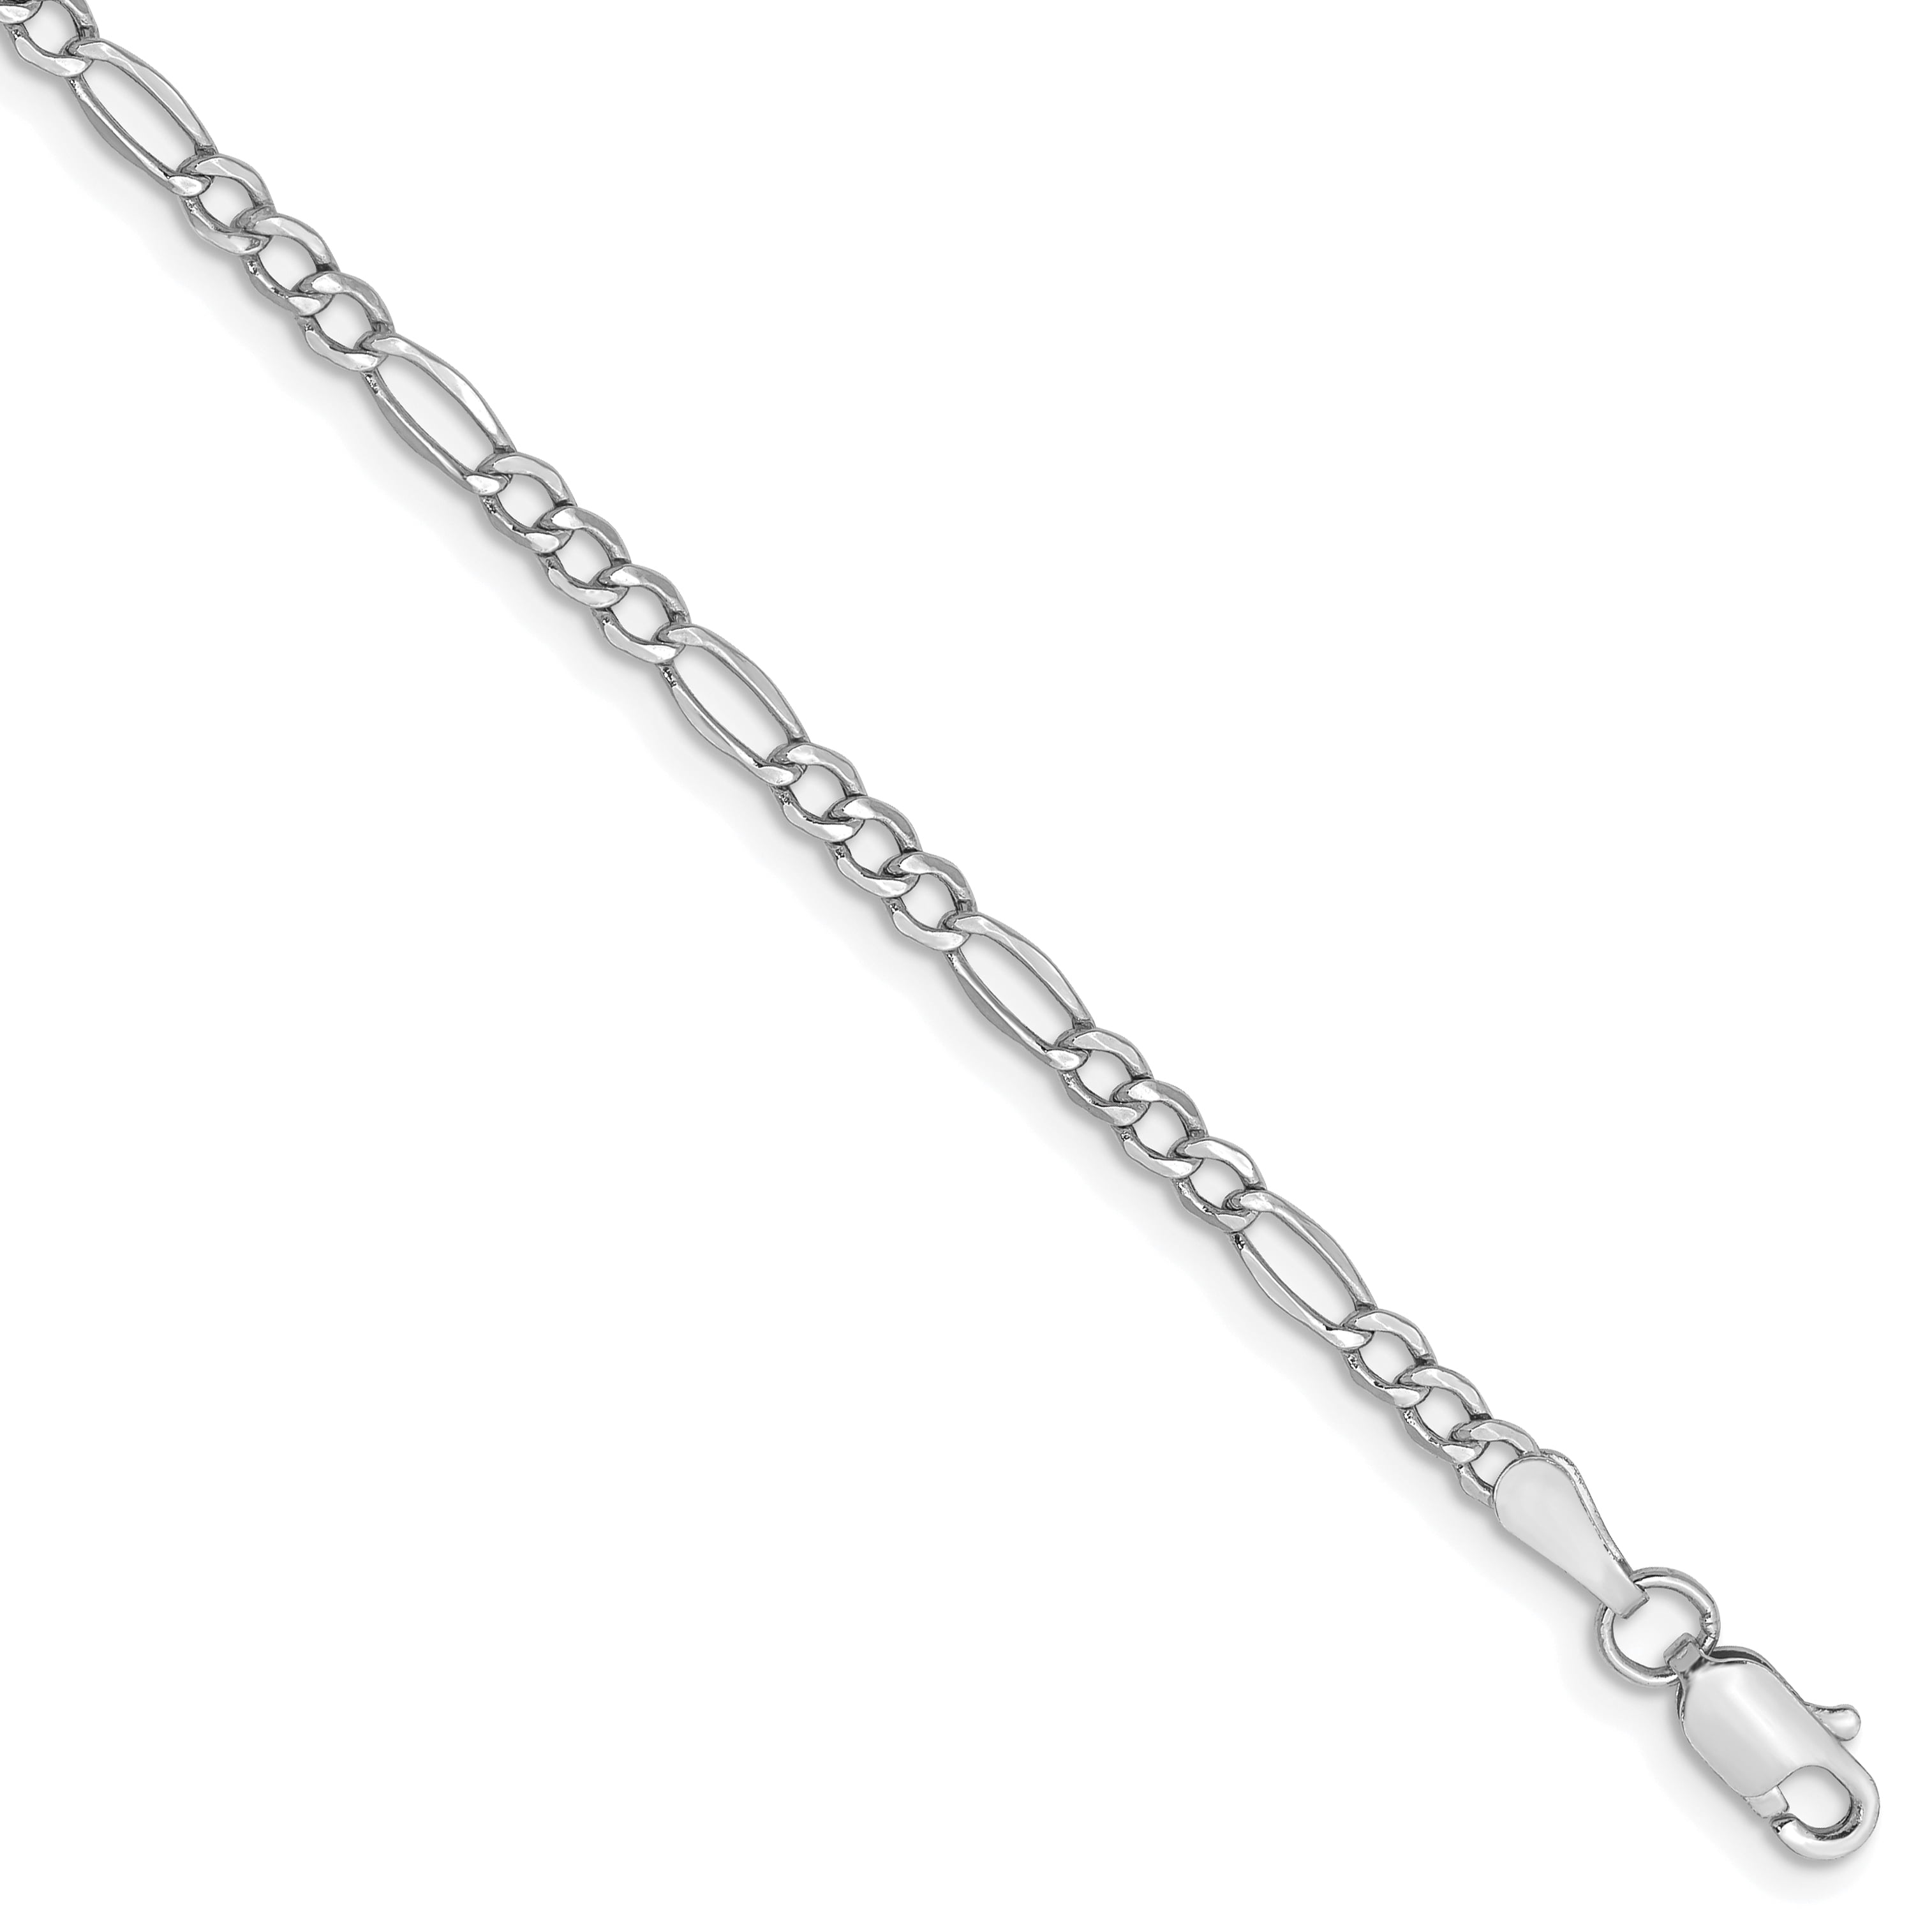 14k White Gold 2.5mm White Gold Figaro Chain Necklace 16 Inch